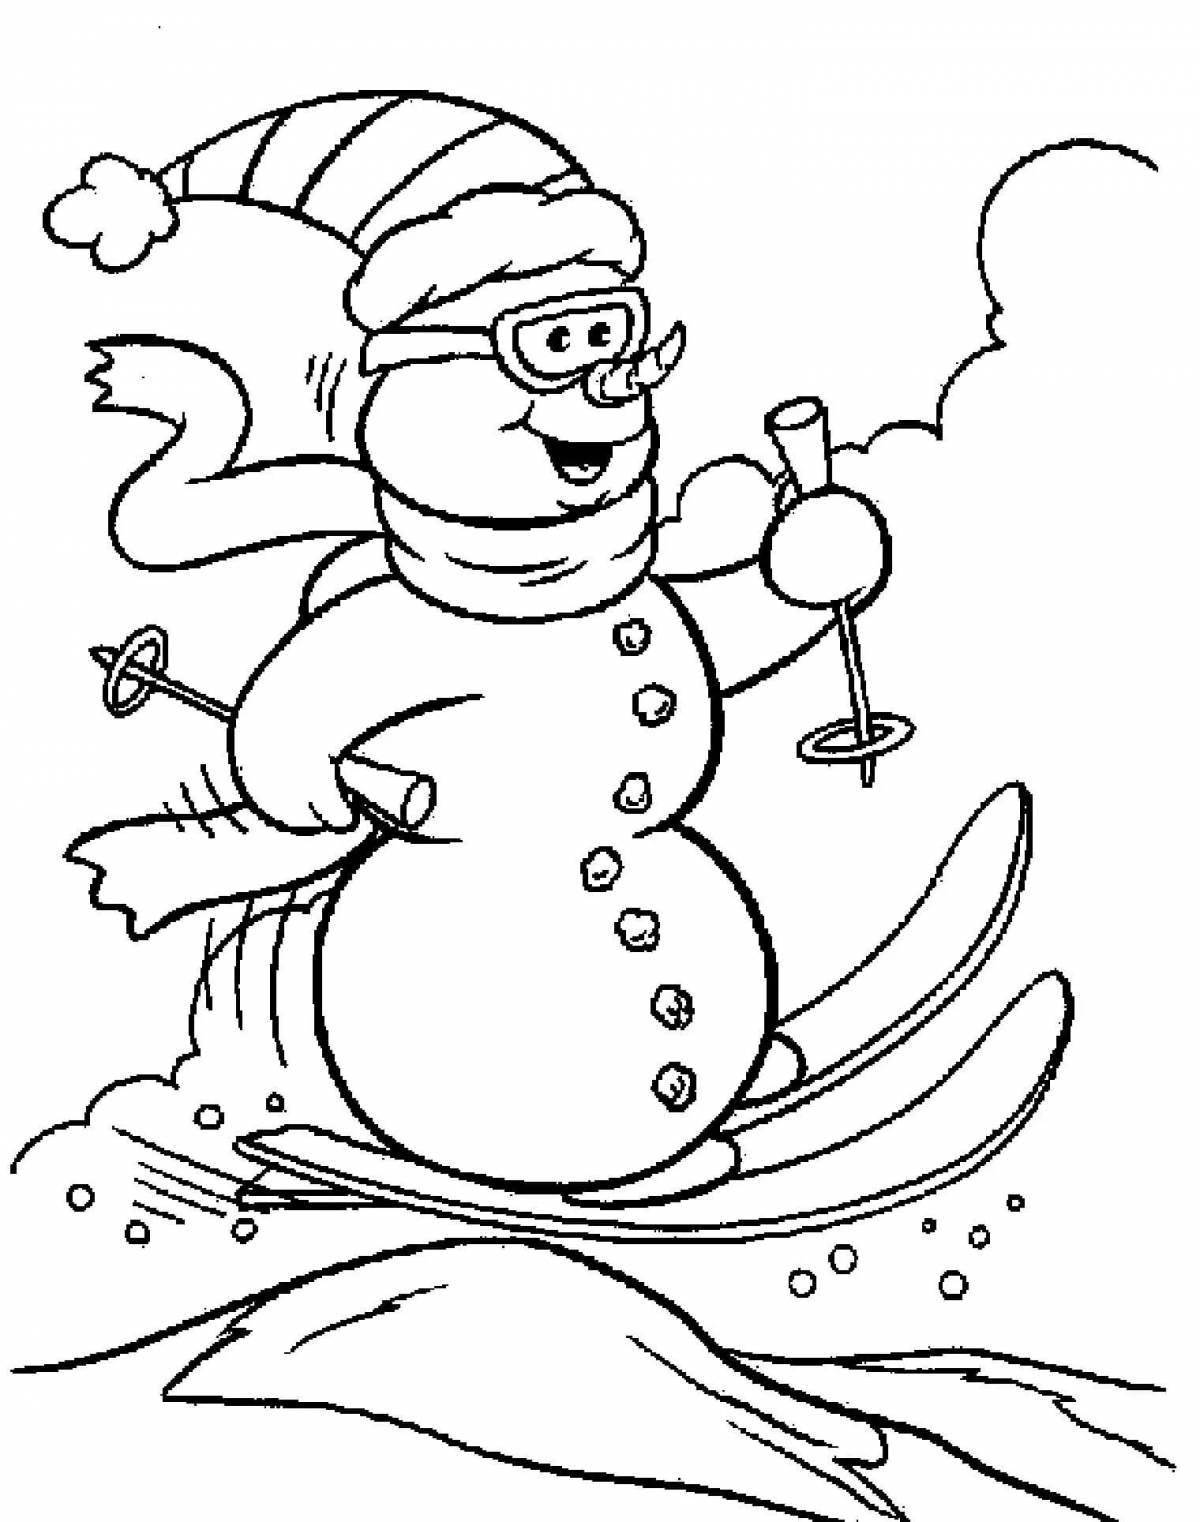 Fun coloring book funny snowman for kids